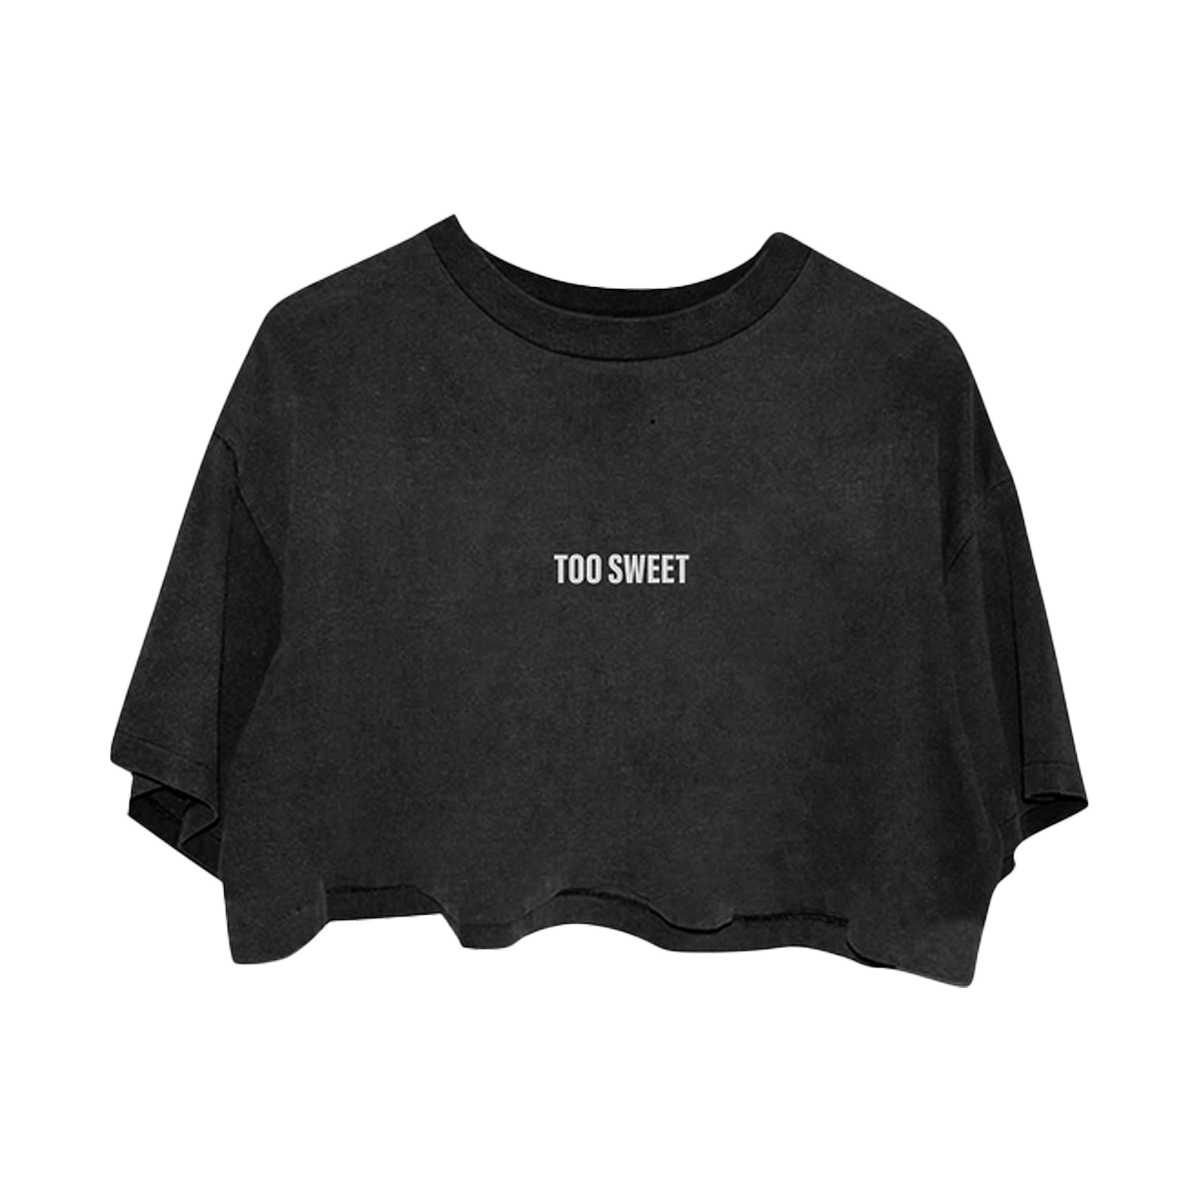 Hozier - Too Sweet Cropped T-Shirt